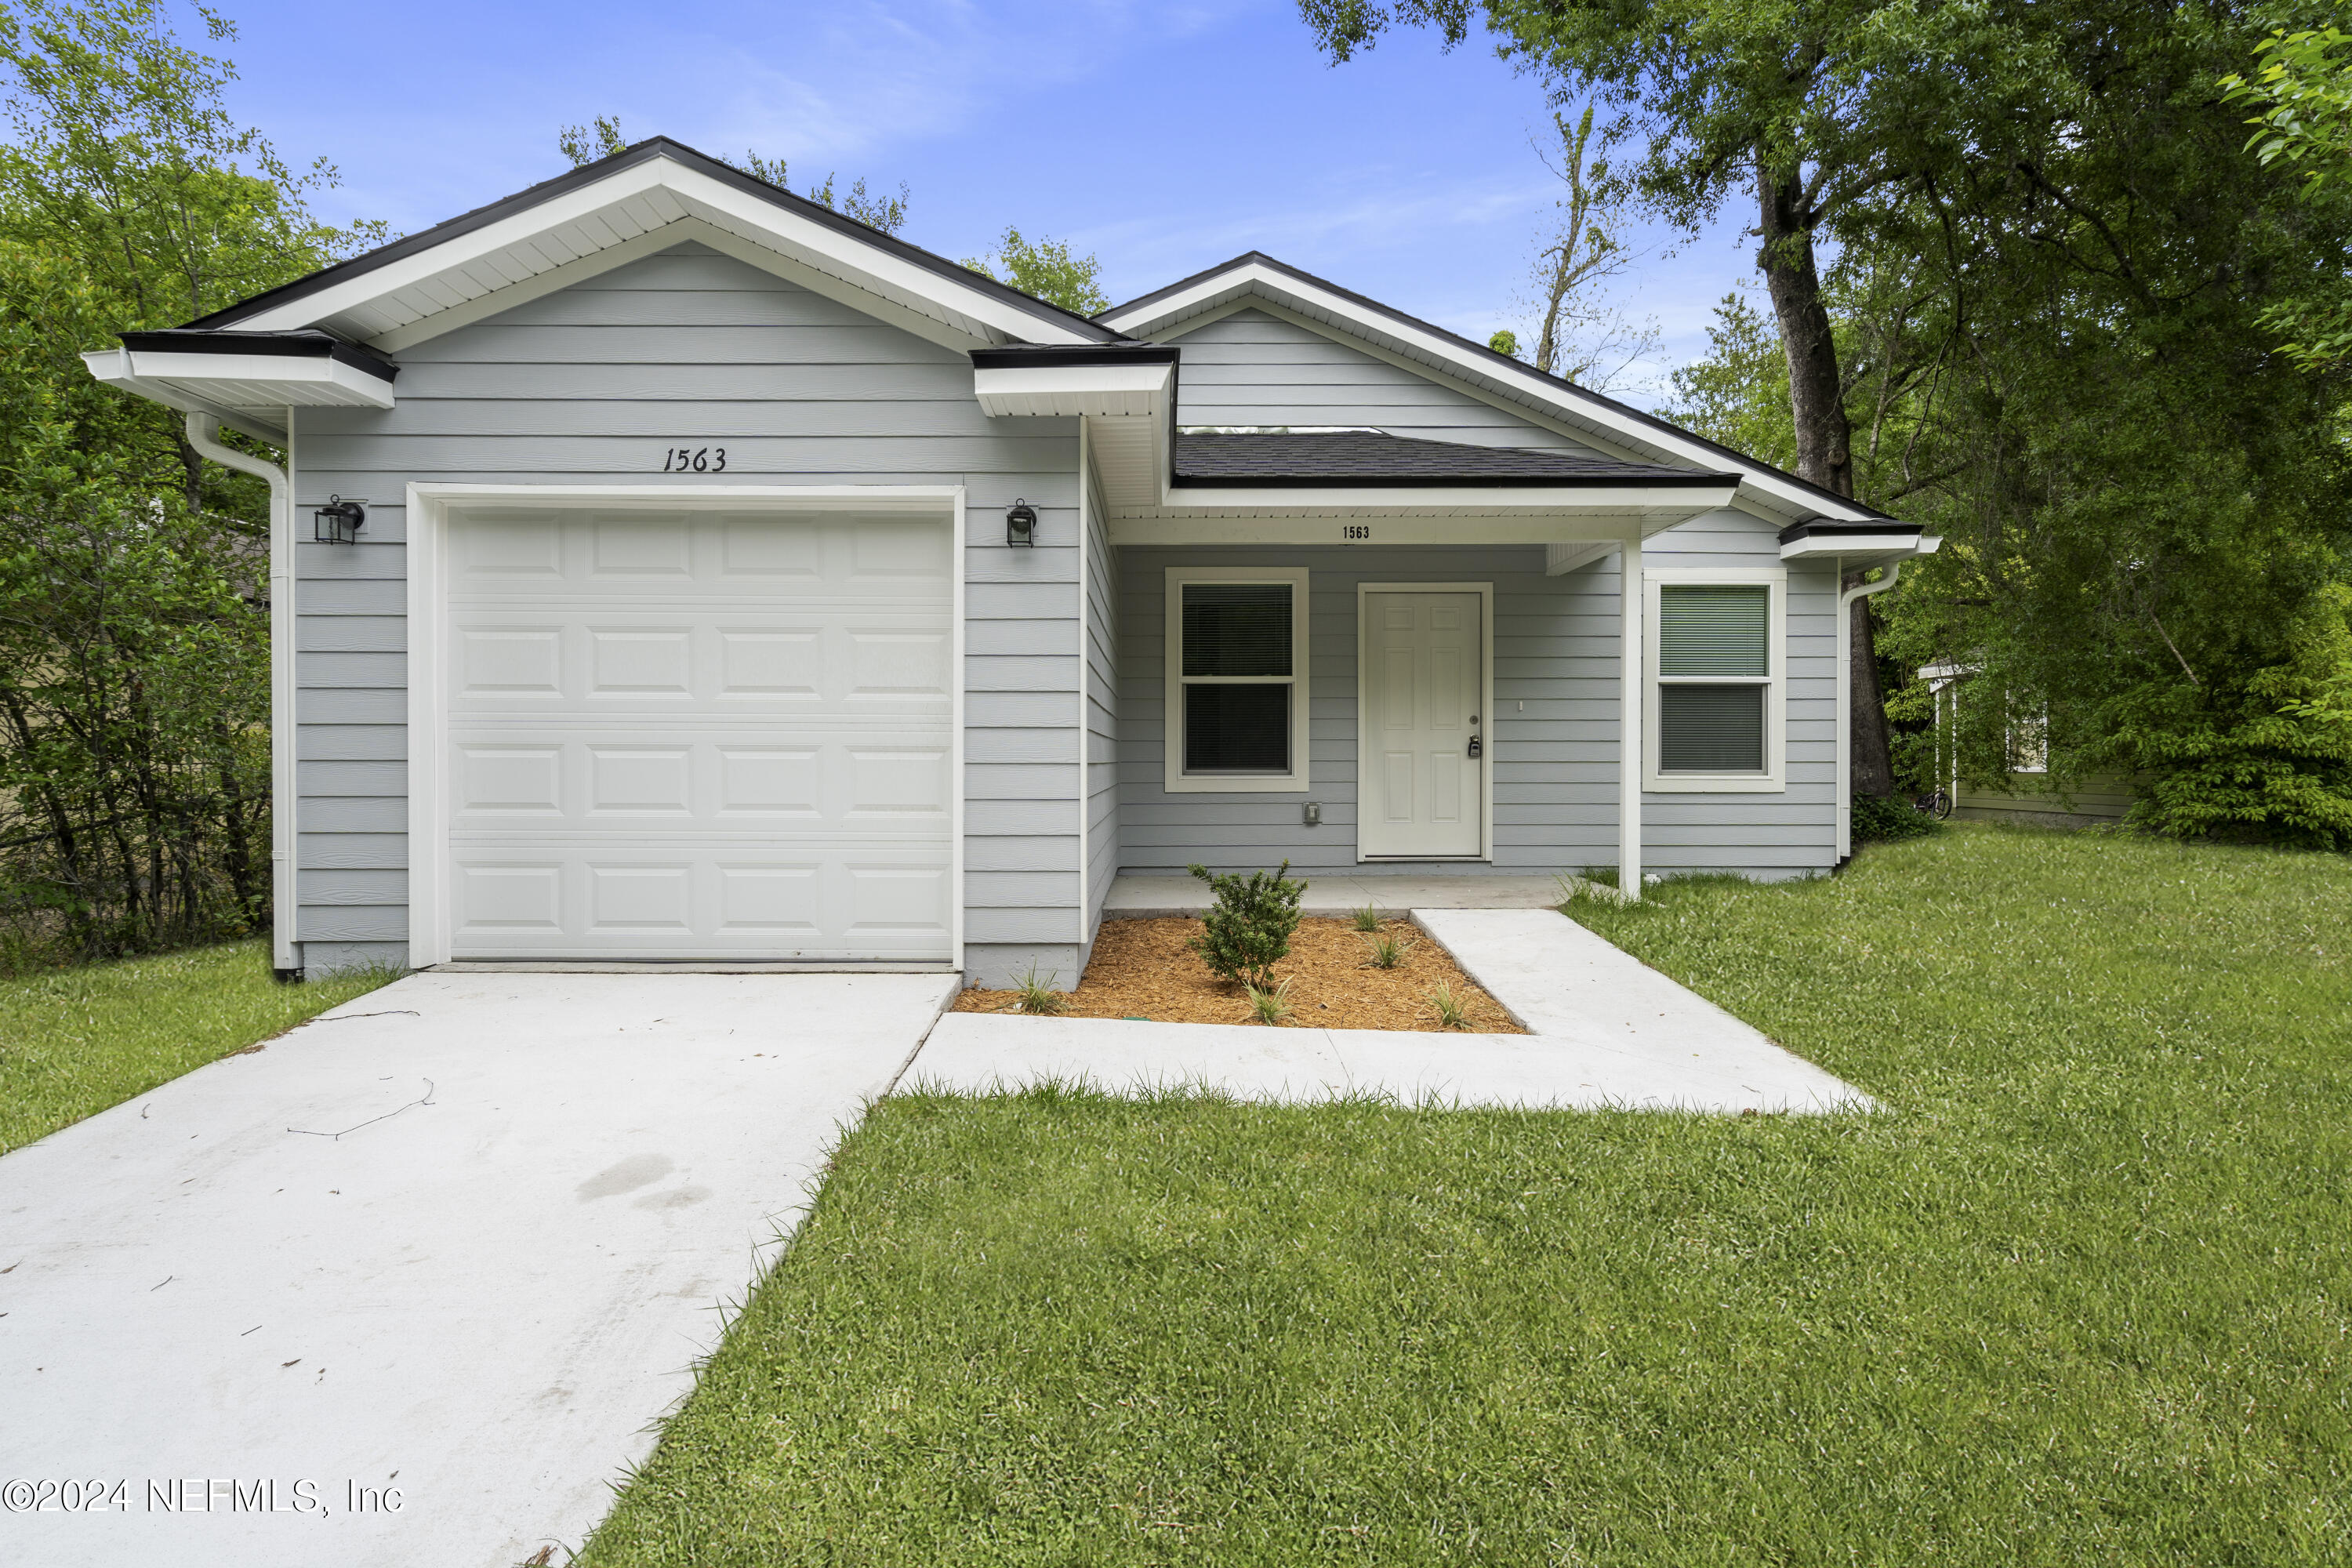 Jacksonville, FL home for sale located at 1563 W 29th Street, Jacksonville, FL 32209